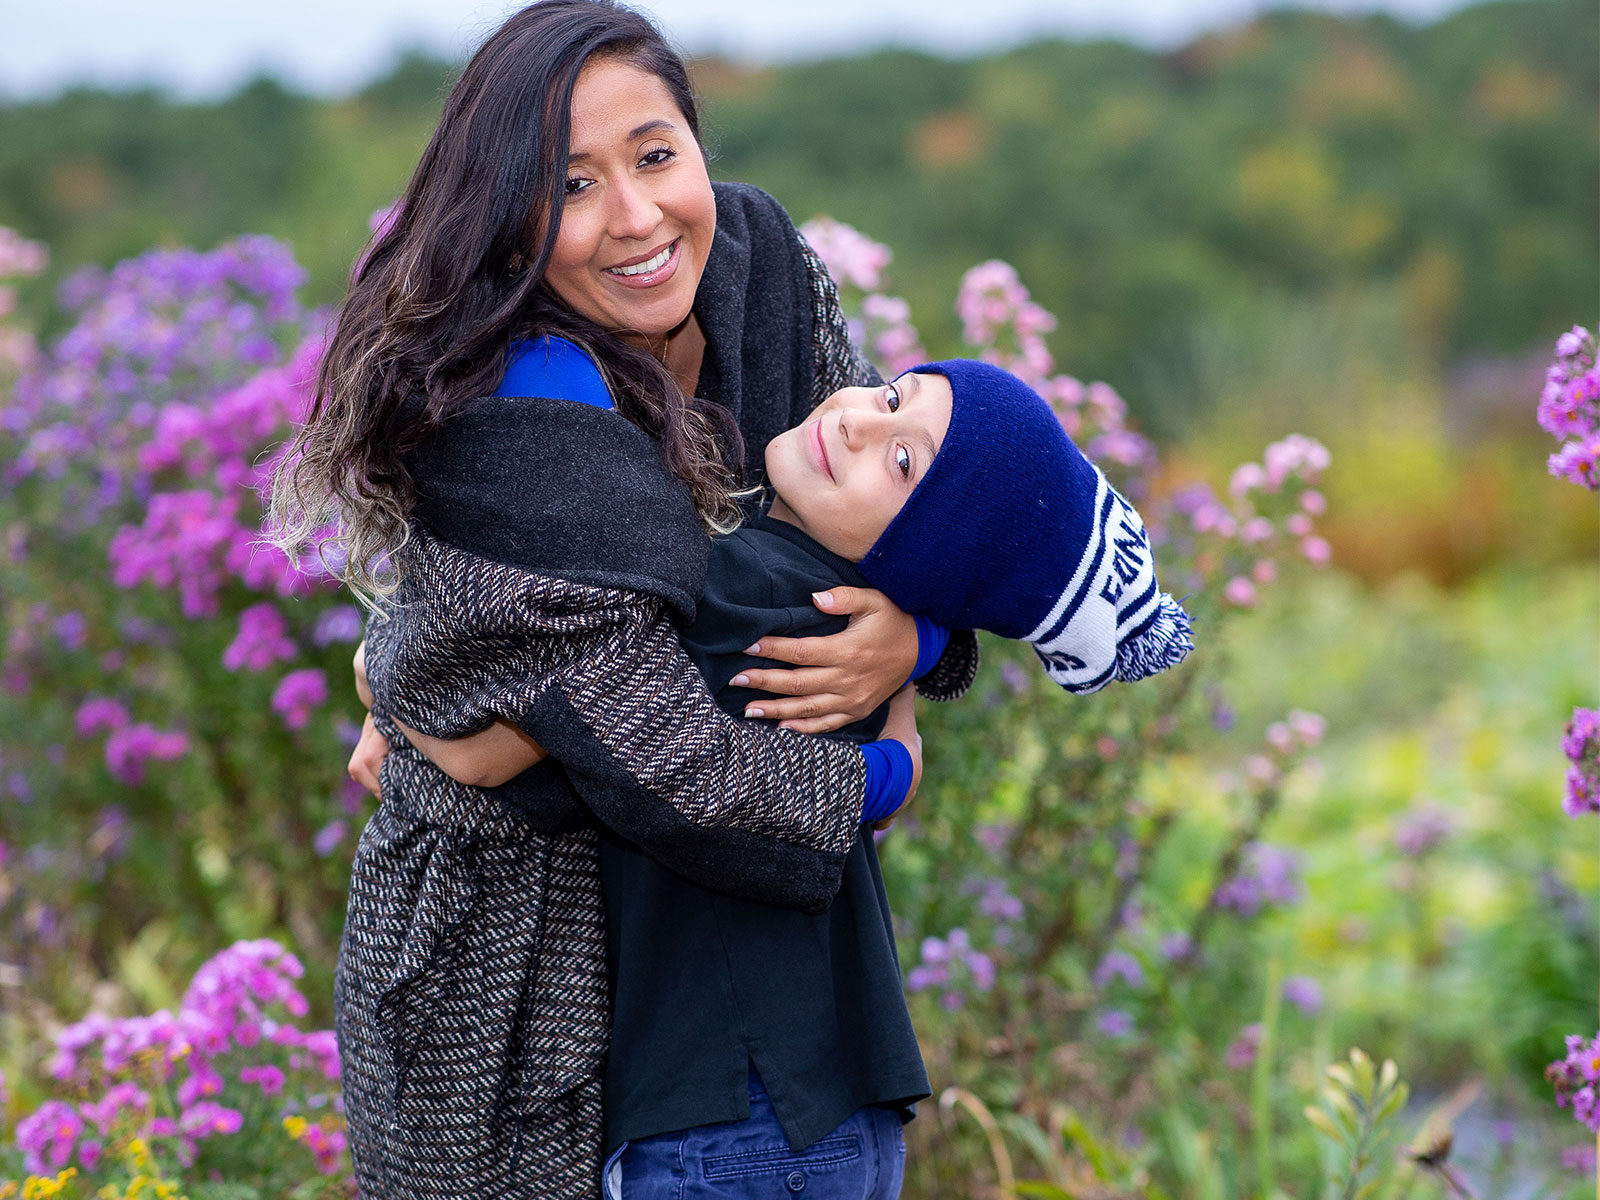 a mom hugs her child as they both smile in a green field with purple flowers